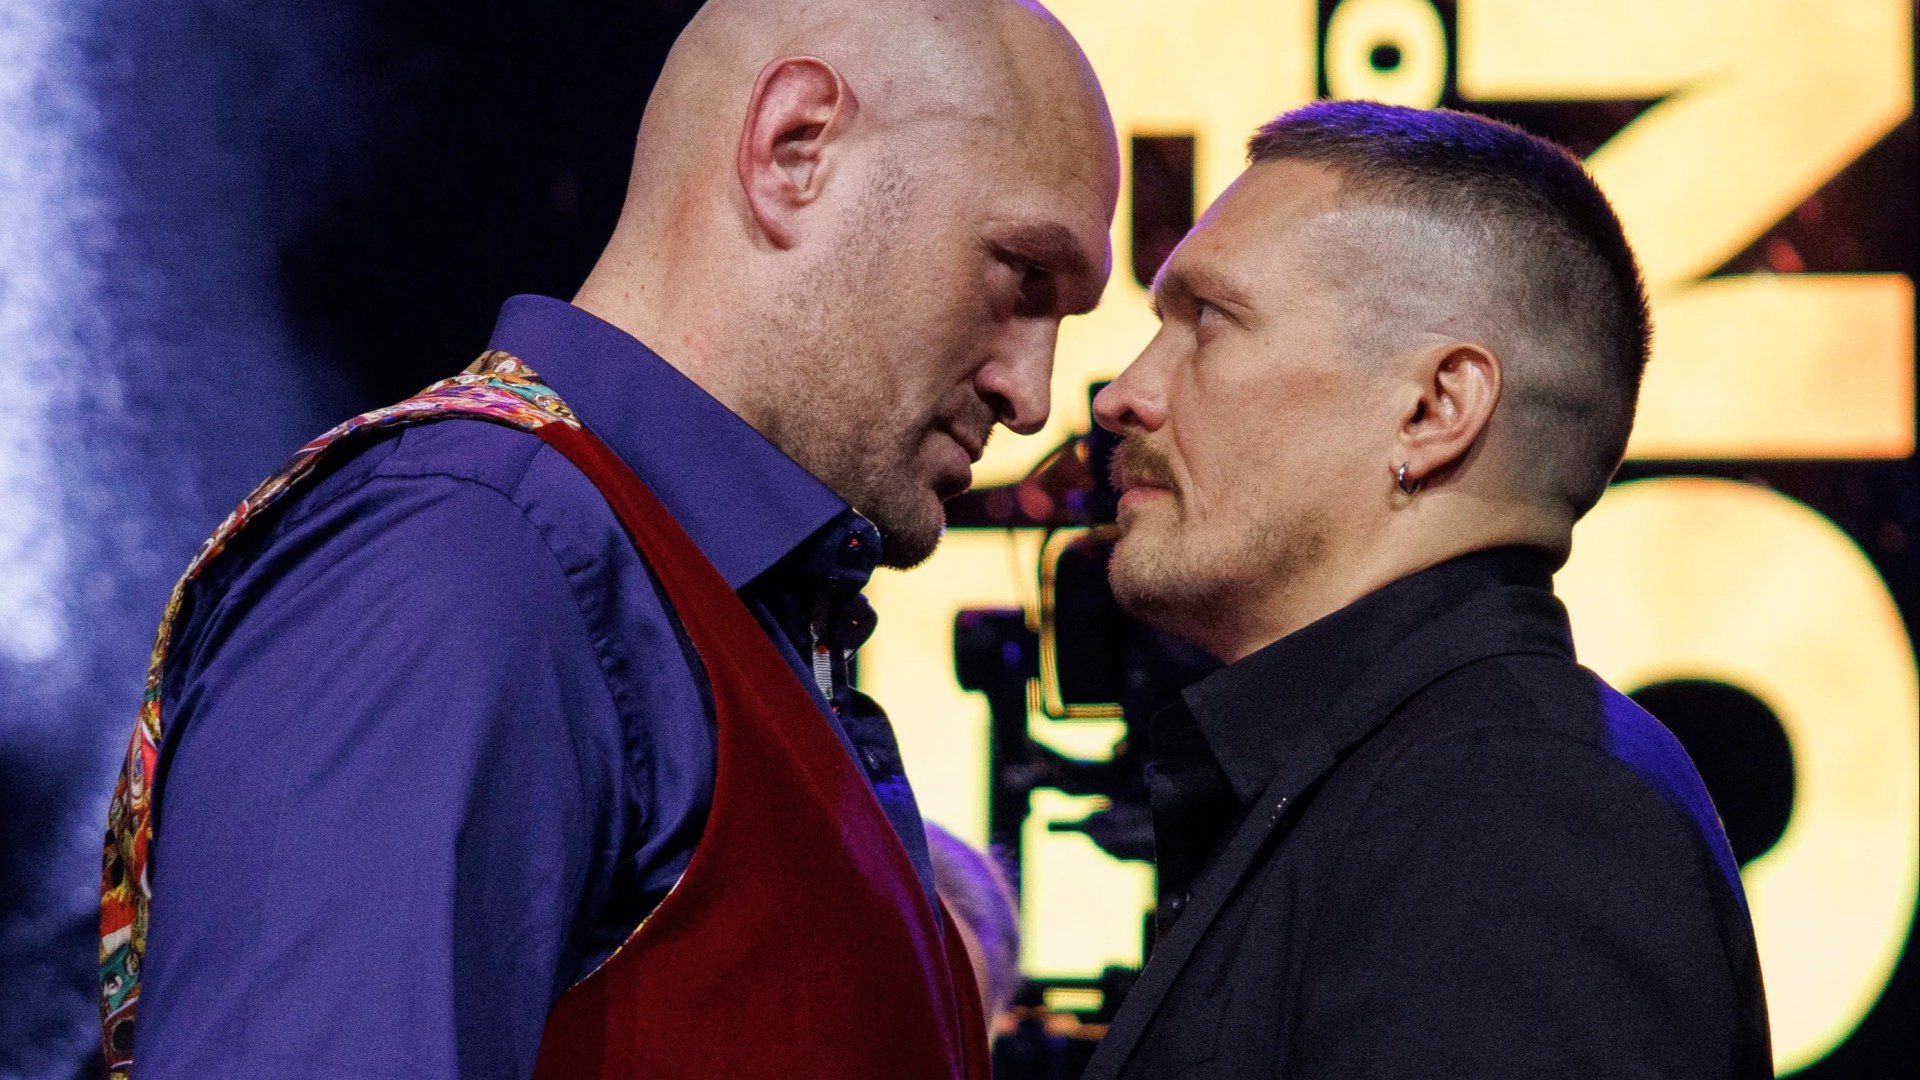 Fury vs Usyk Showdown: Fight Fans Shocked by PPV Price Tag